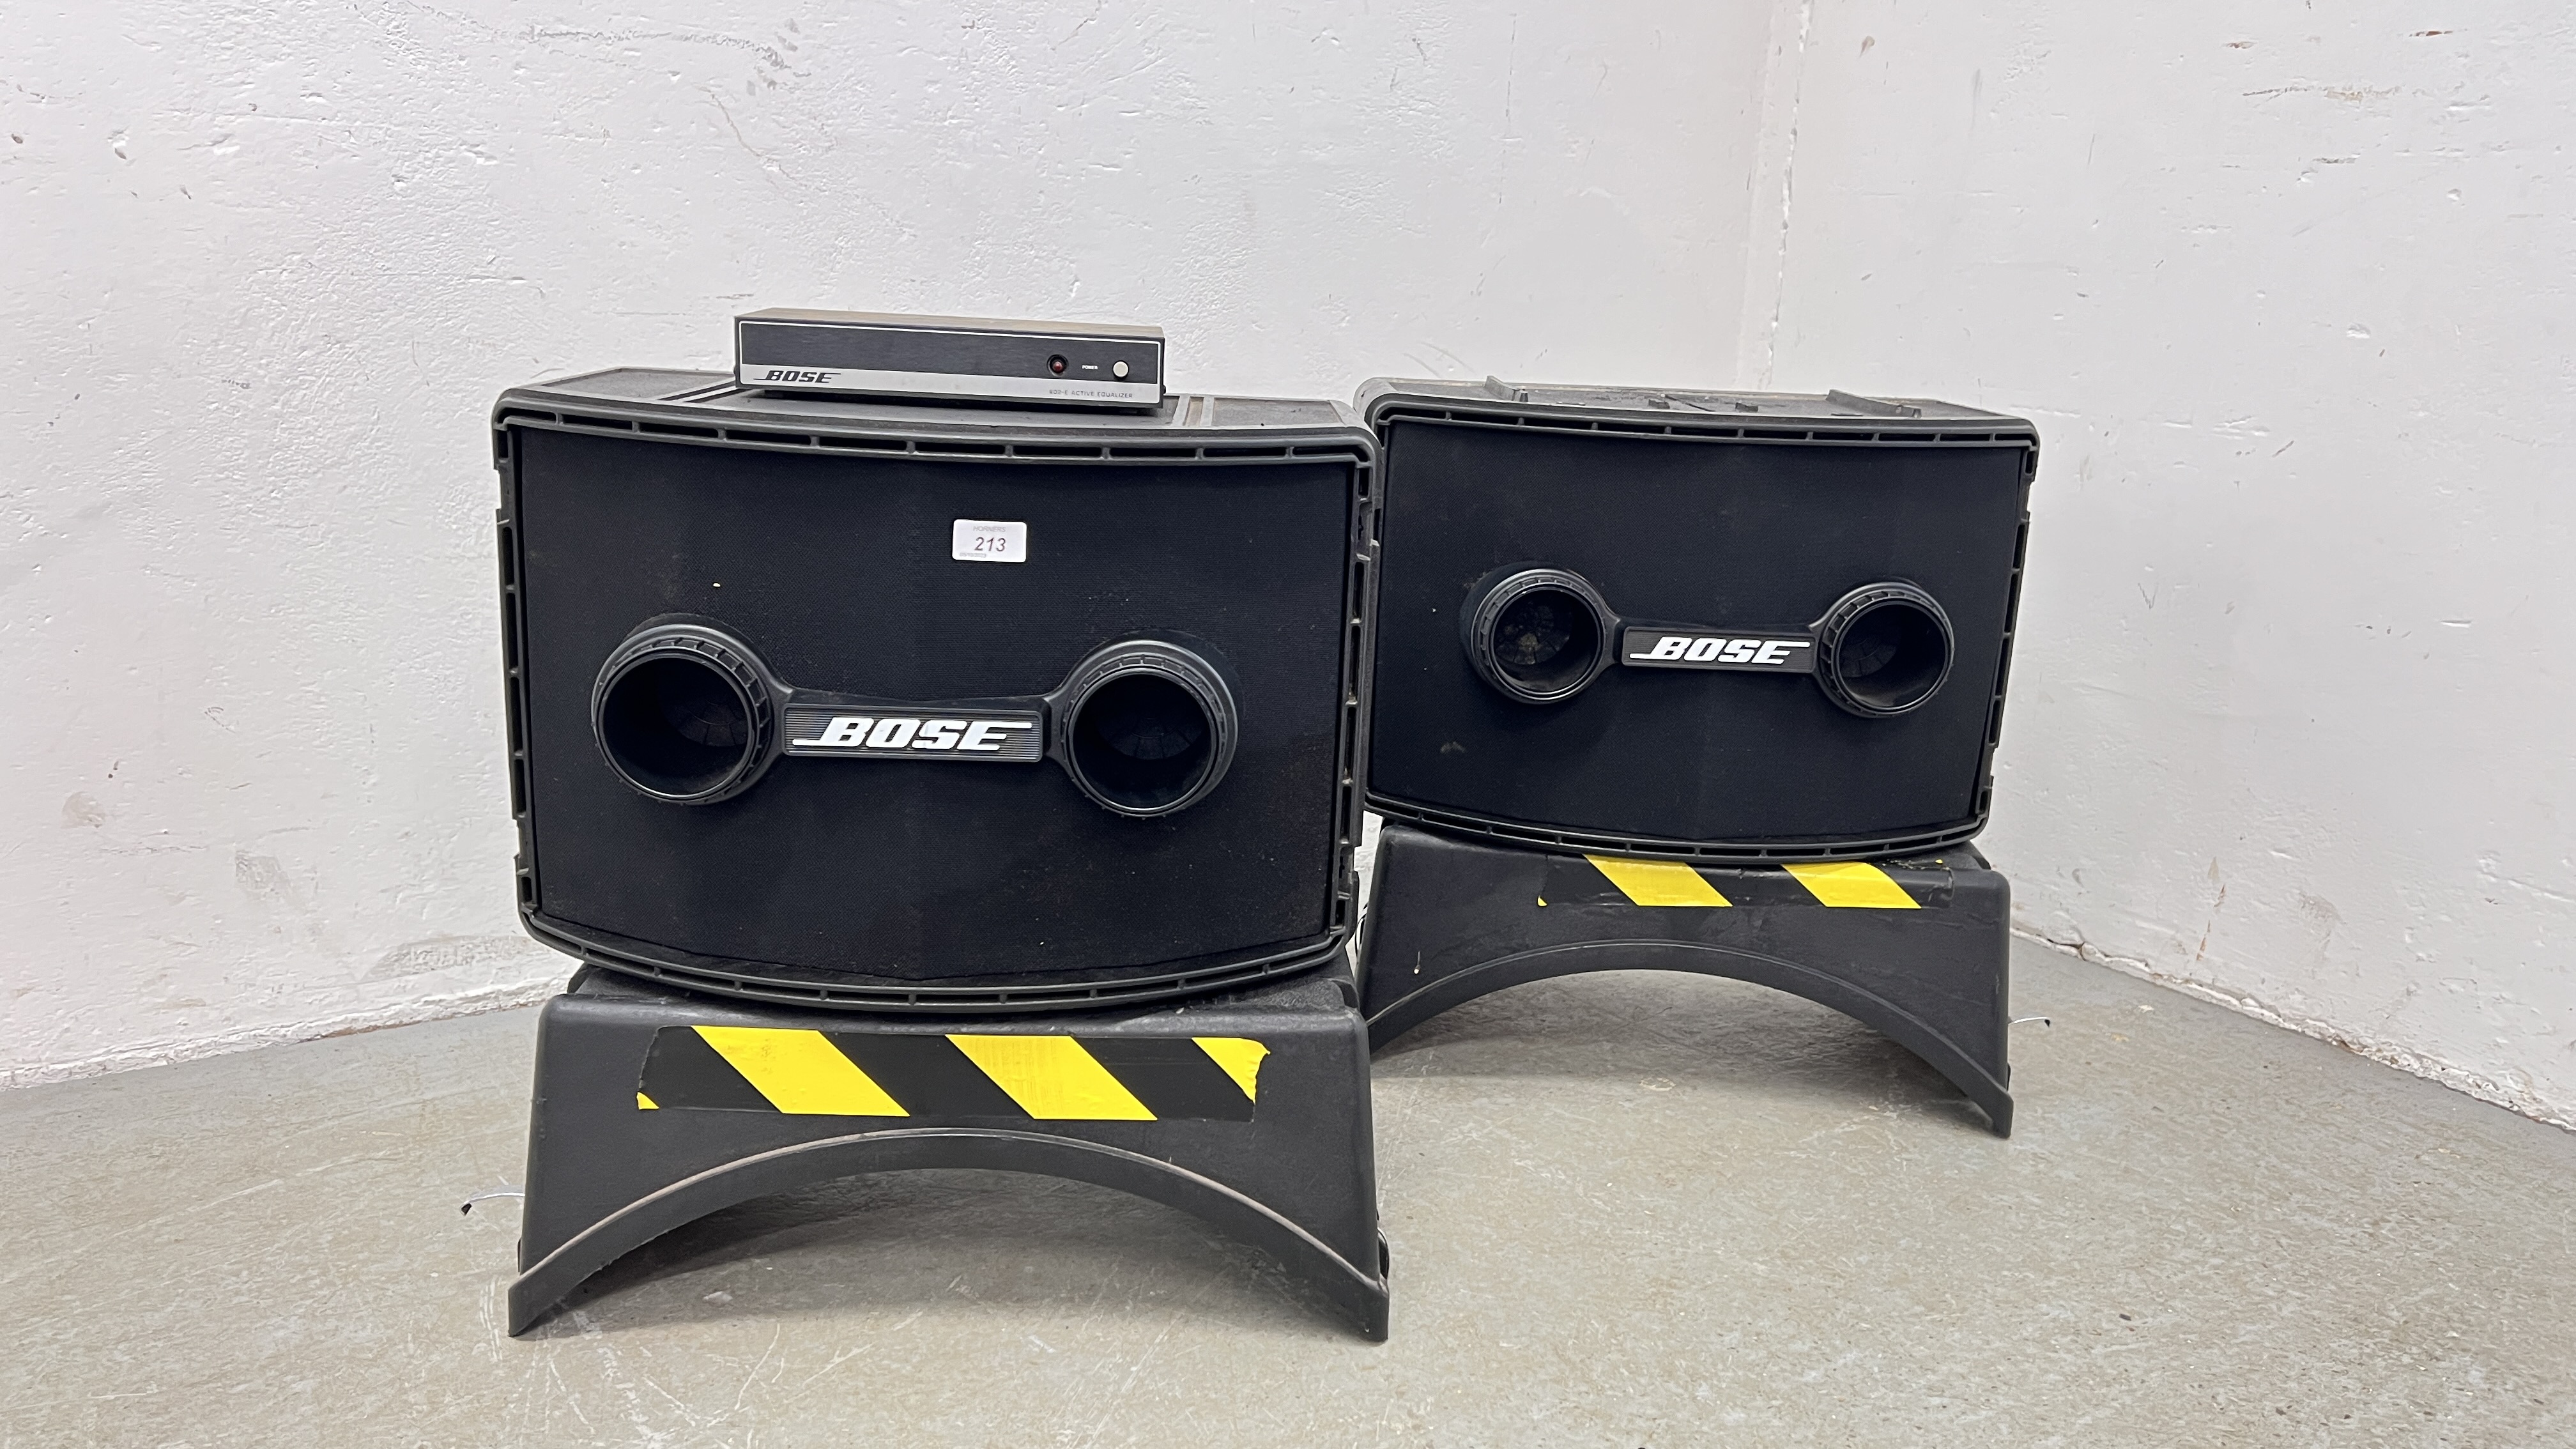 PAIR OF BOSE 802 PROFESSIONAL LOUDSPEAKERS WITH BOSE 802-E ACTIVE EQUALIZER - SOLD AS SEEN - AS